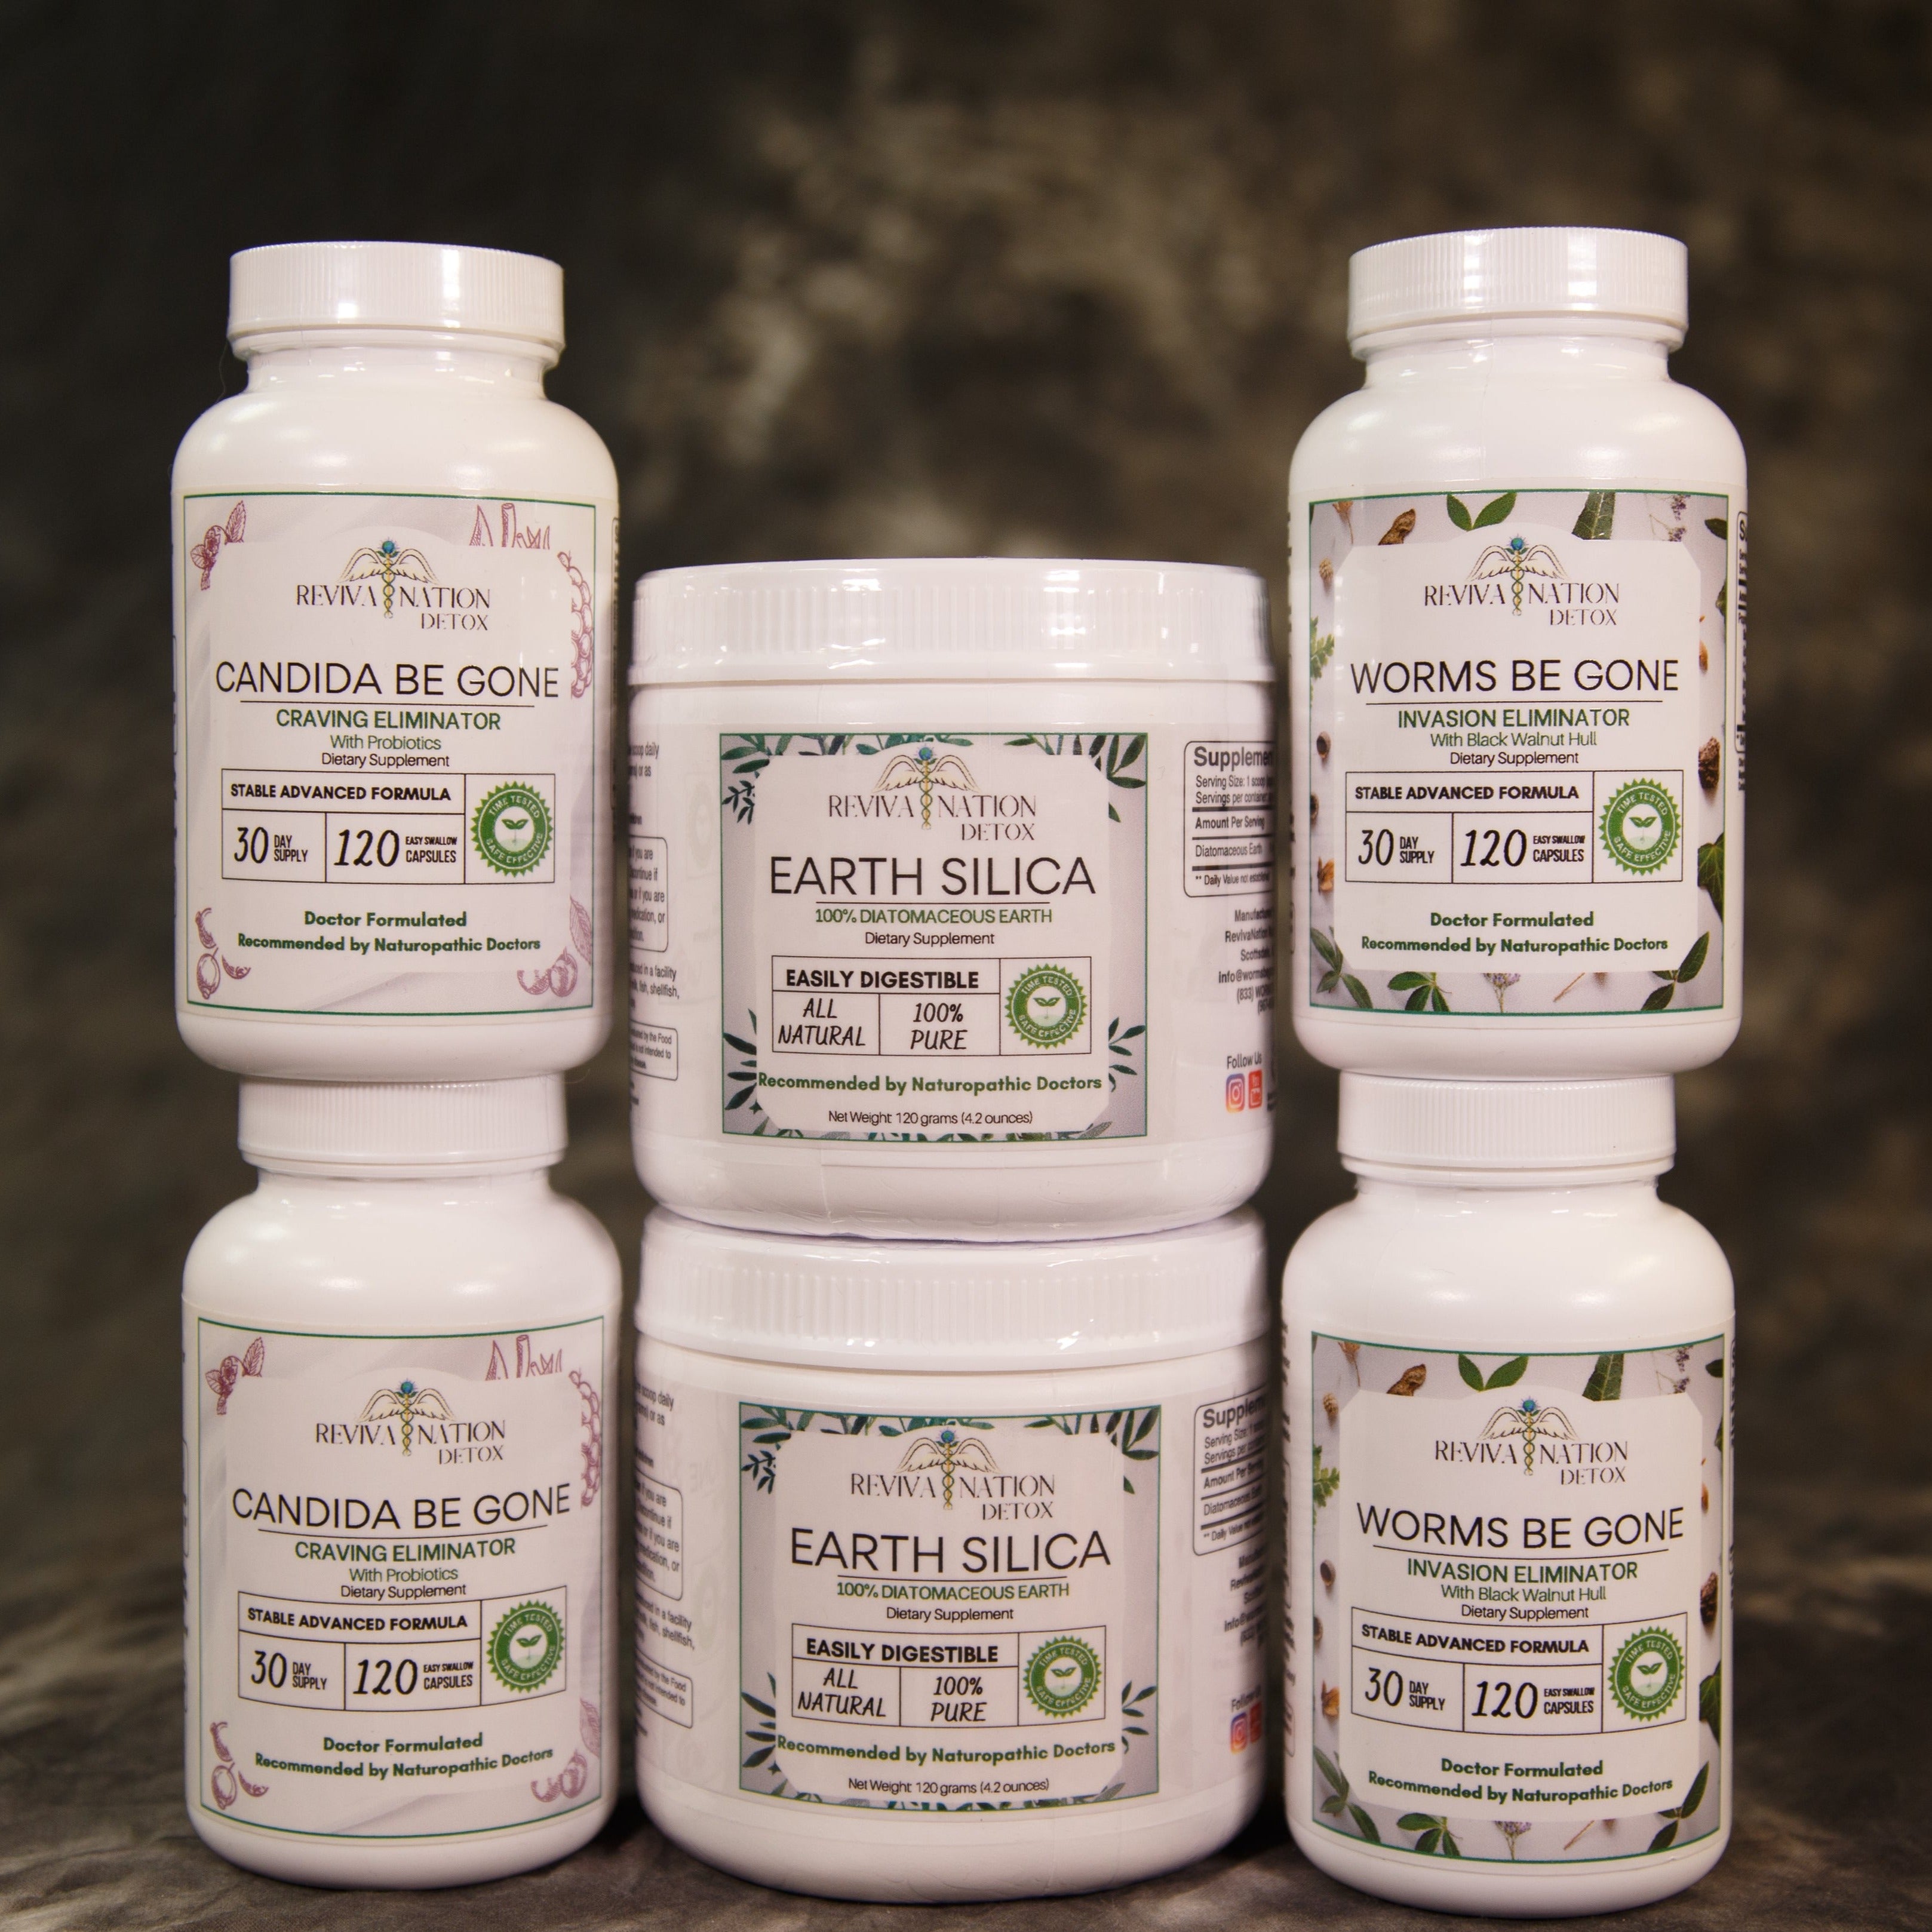 Worms Be Gone + Candida Be Gone Cleanse • 60-Day Supply - Love My Colon